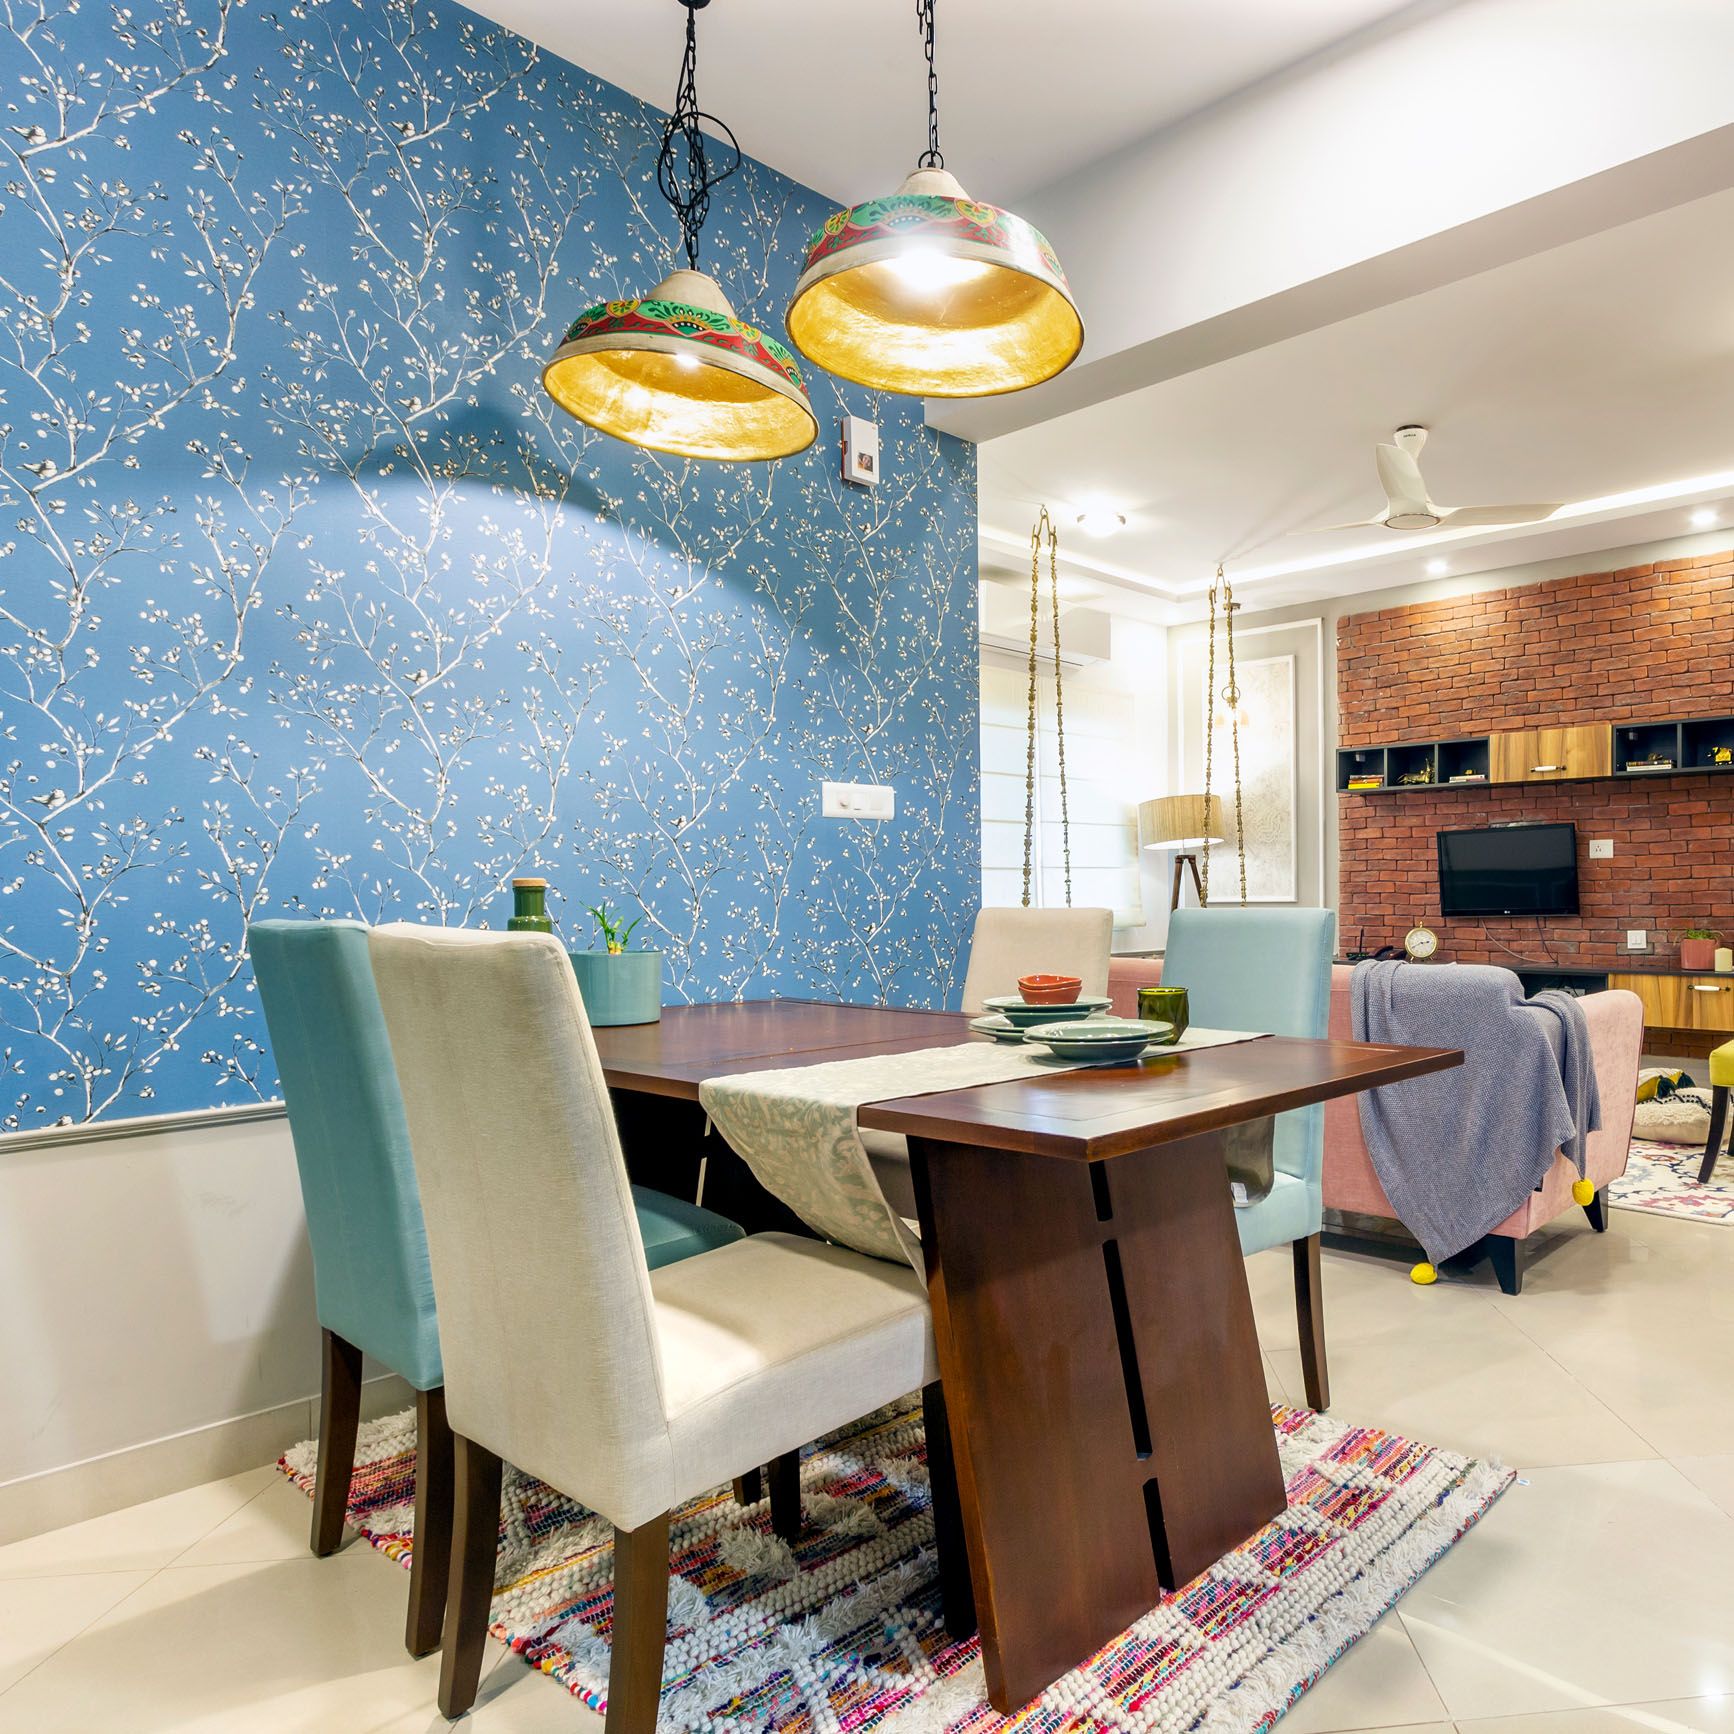 Contemporary Wooden 4-Seater Dining Room Design With Blue Floral Wallpaper